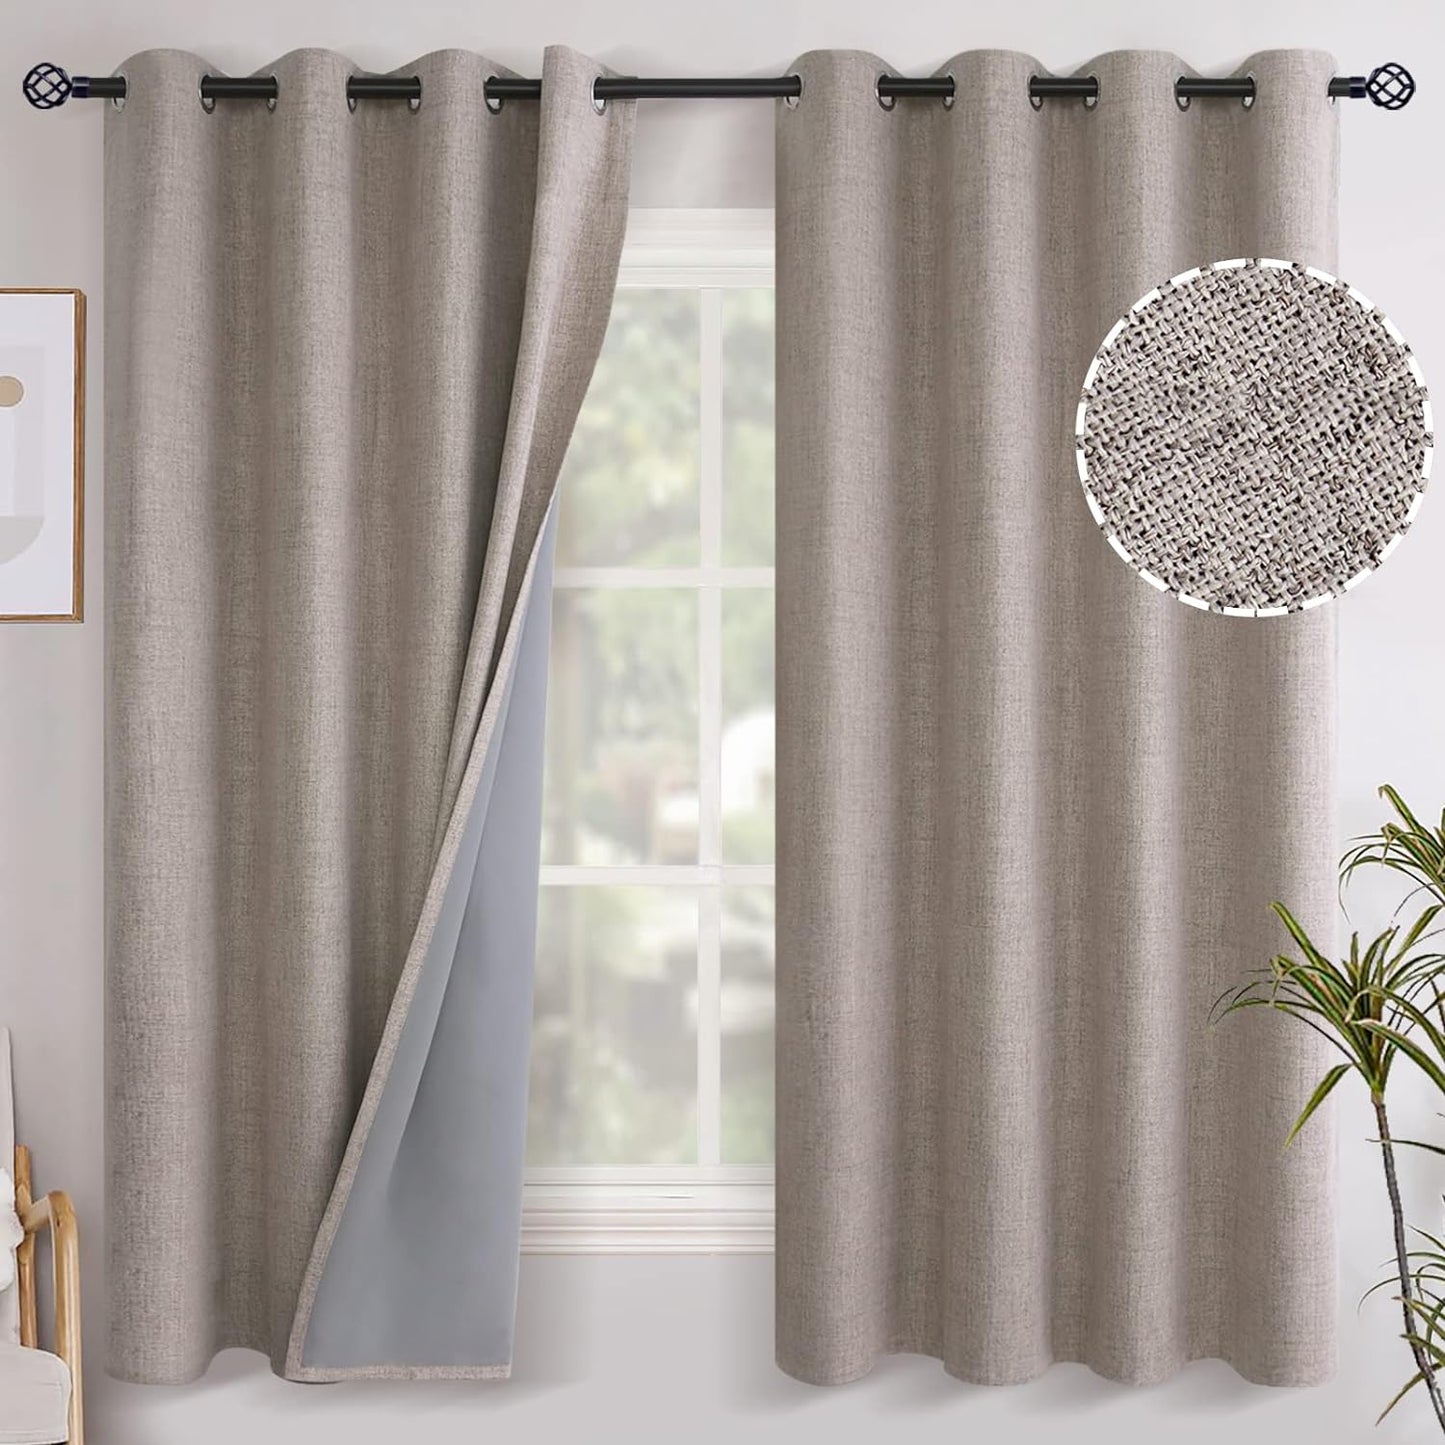 Youngstex Linen Blackout Curtains 63 Inch Length, Grommet Darkening Bedroom Curtains Burlap Linen Window Drapes Thermal Insulated for Basement Summer Heat, 2 Panels, 52 X 63 Inch, Beige  YoungsTex Burlap 52W X 63L 